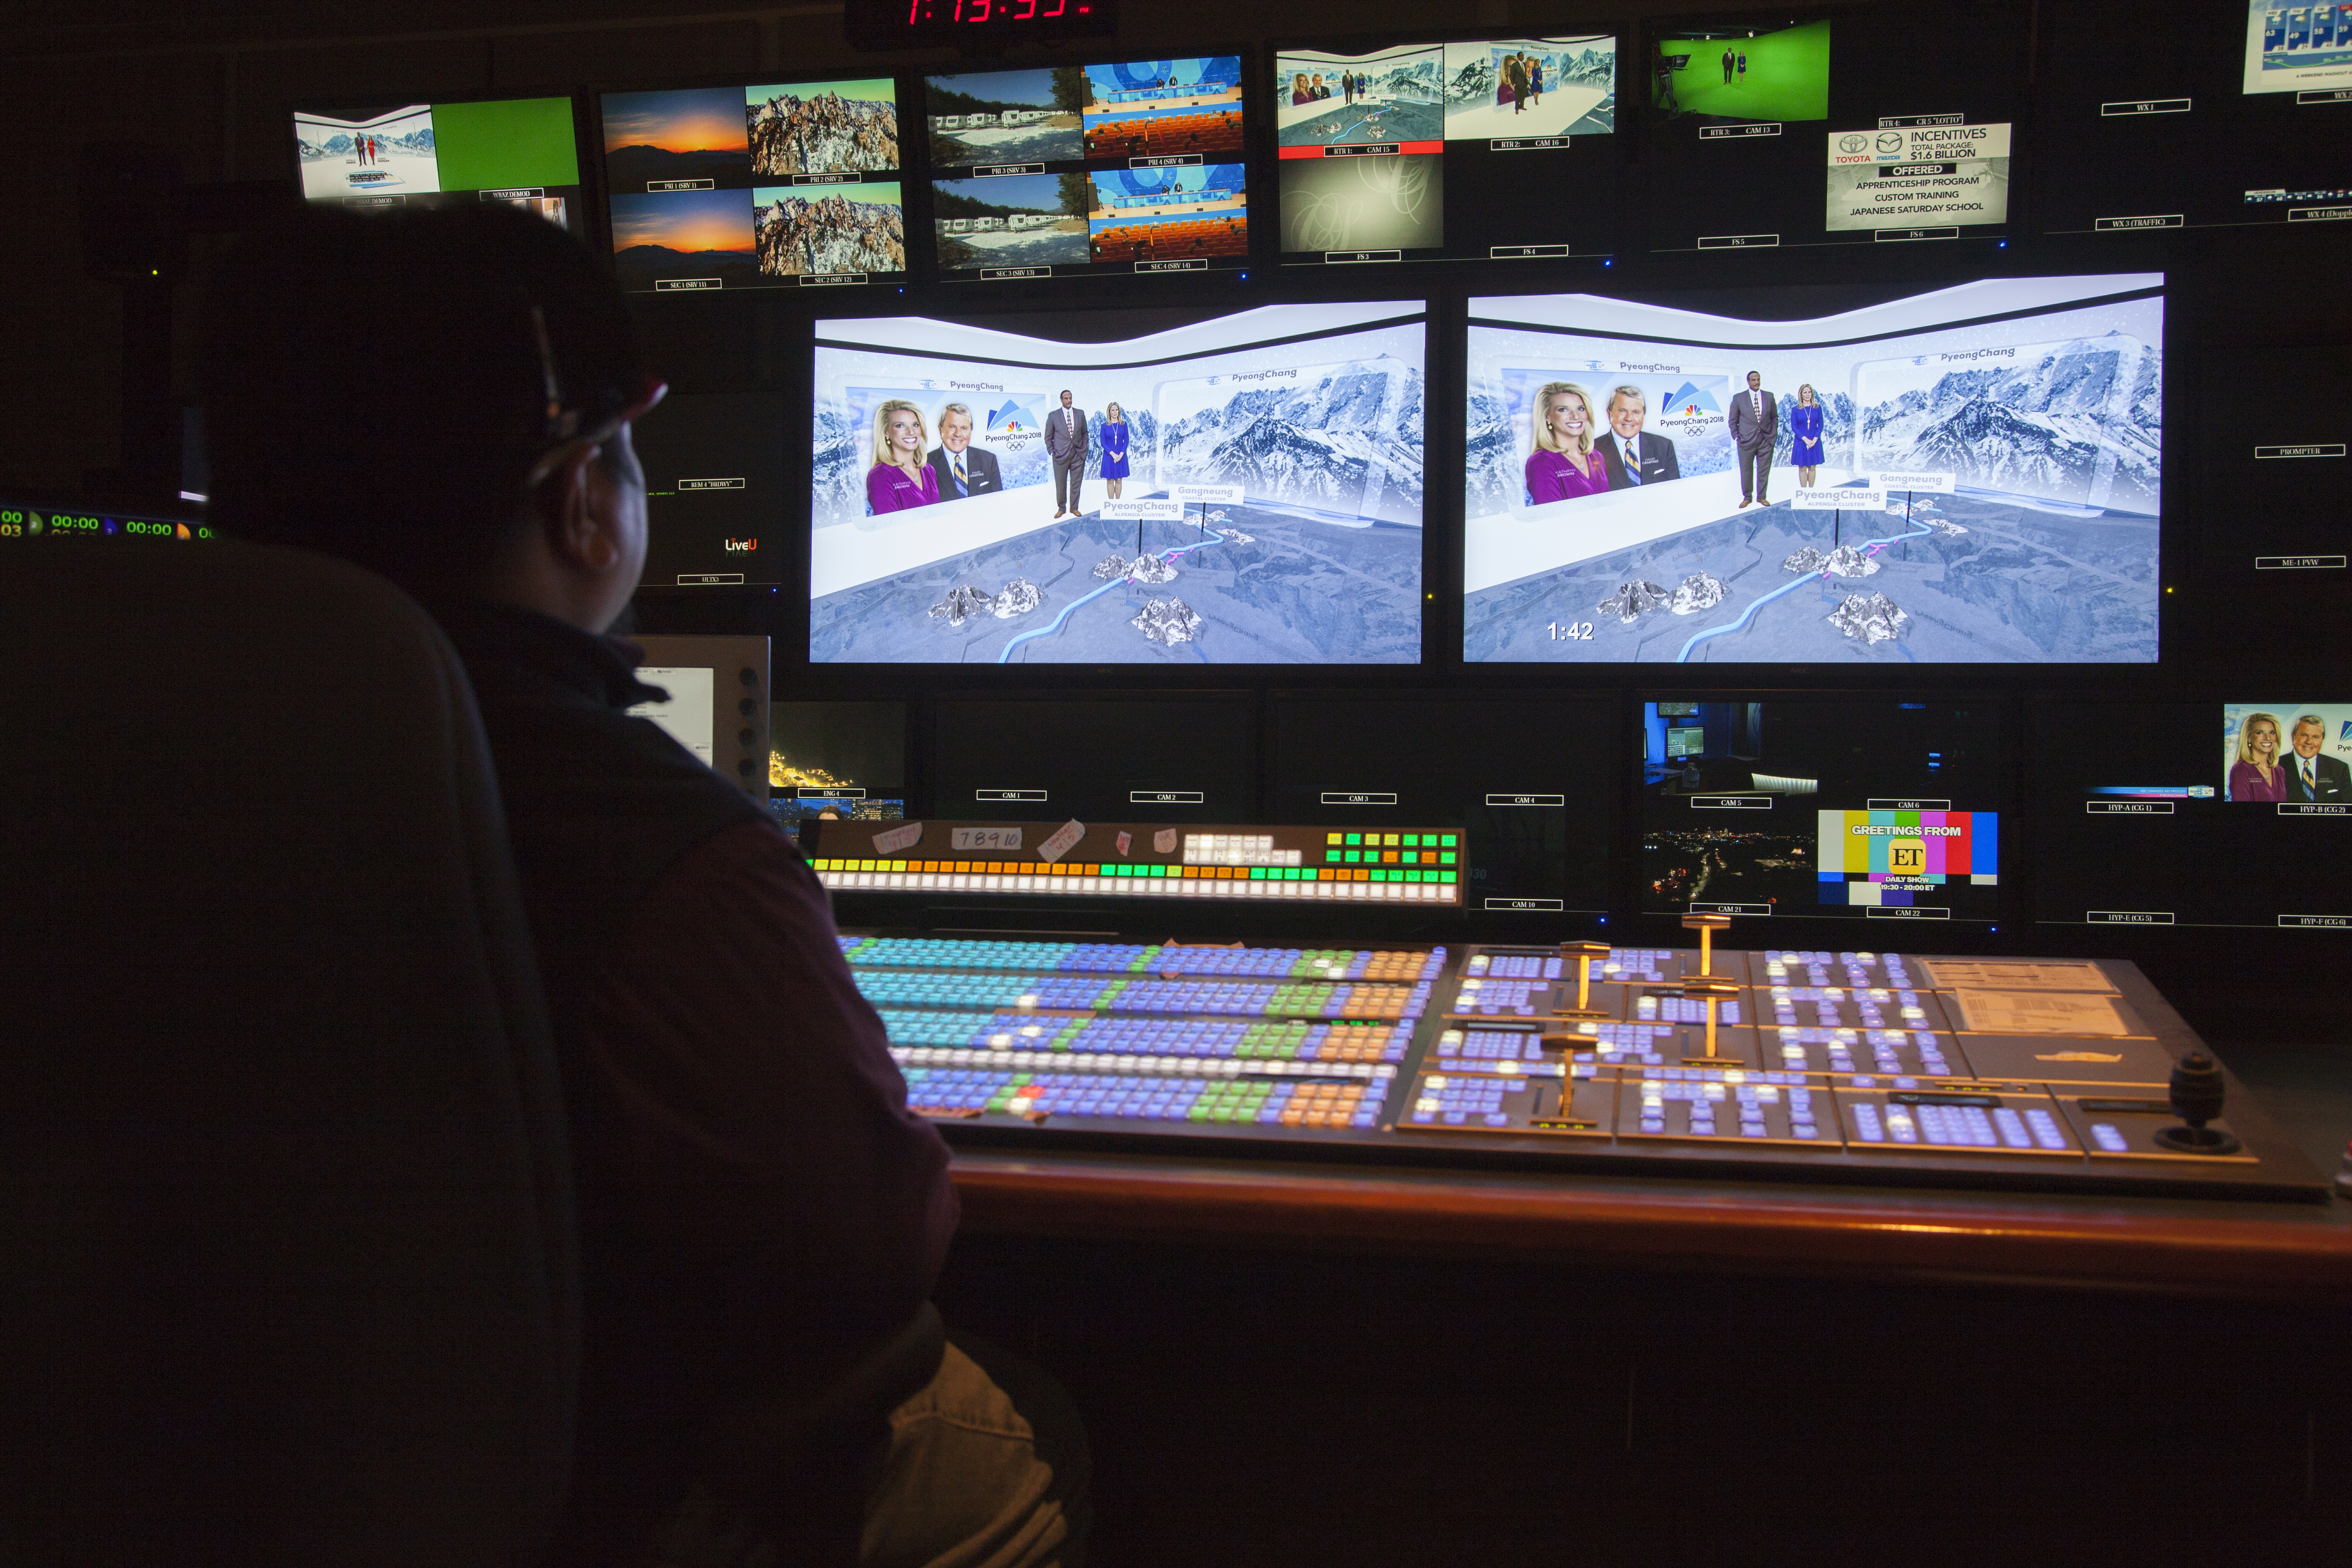 In WRAL-TV's production control room, operators view the station’s augmented reality set for their coverage of the 2018 Winter Olympics. Raleigh, North Carolina-based WRAL’s new AR/VR studio is one of many efforts by local television news stations to innovate in order to attract younger, more diverse audiences